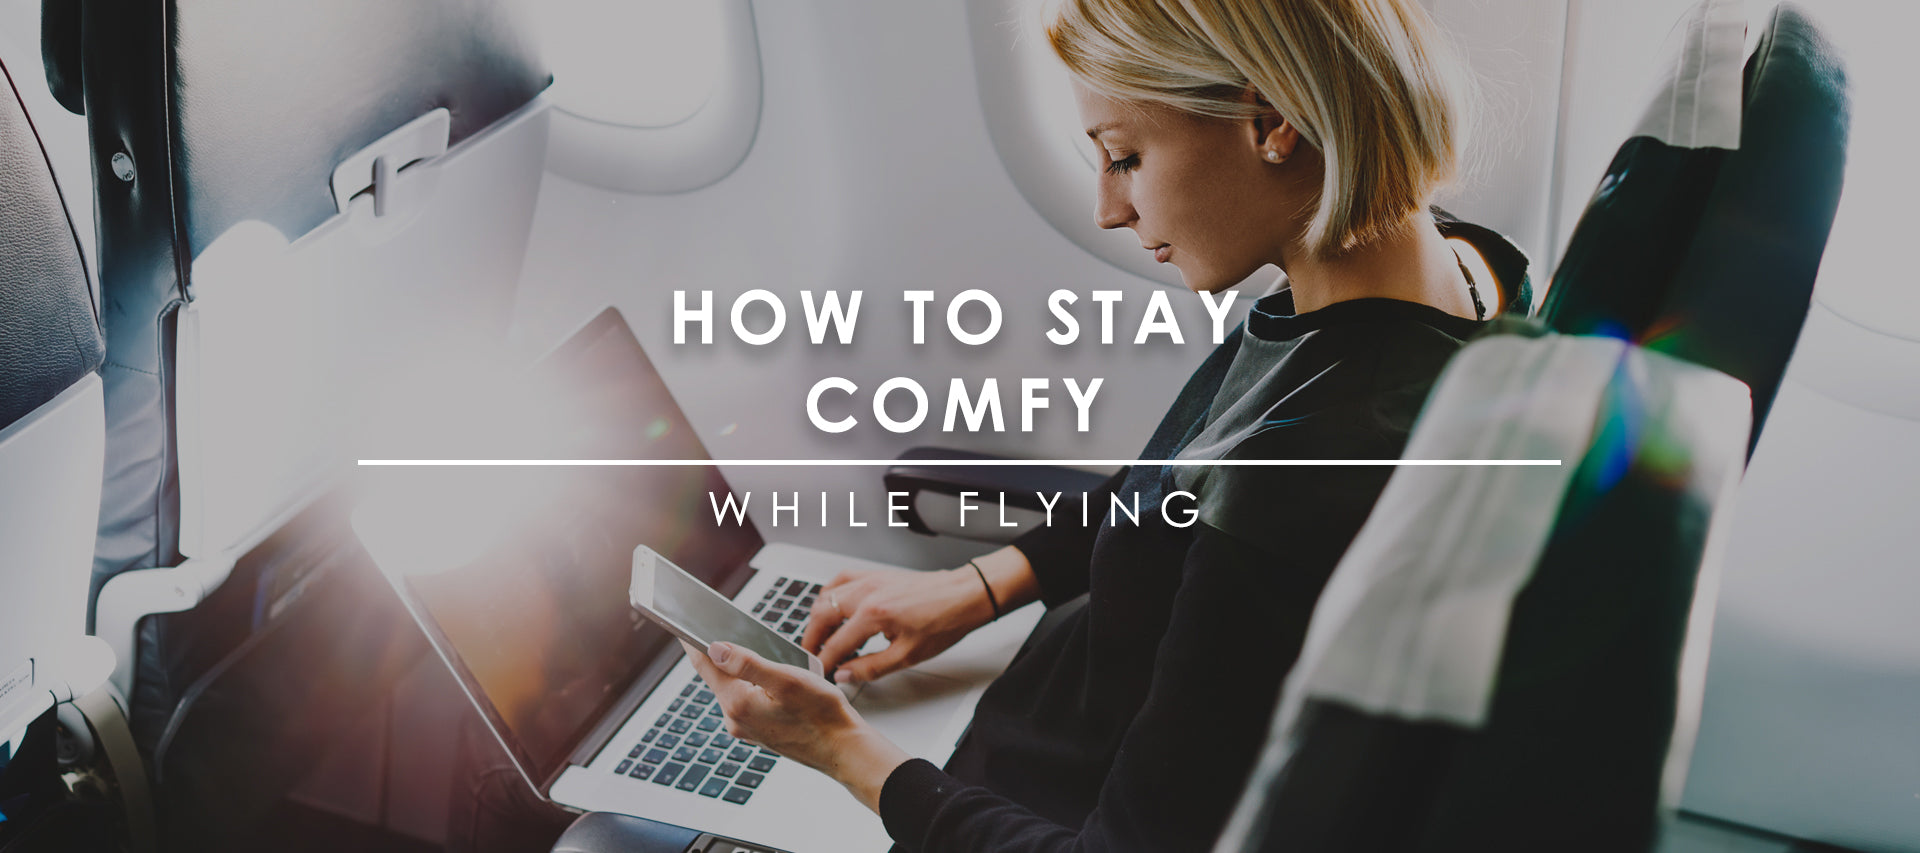 How To Stay Comfortable While Flying - Roam Often Blog Post